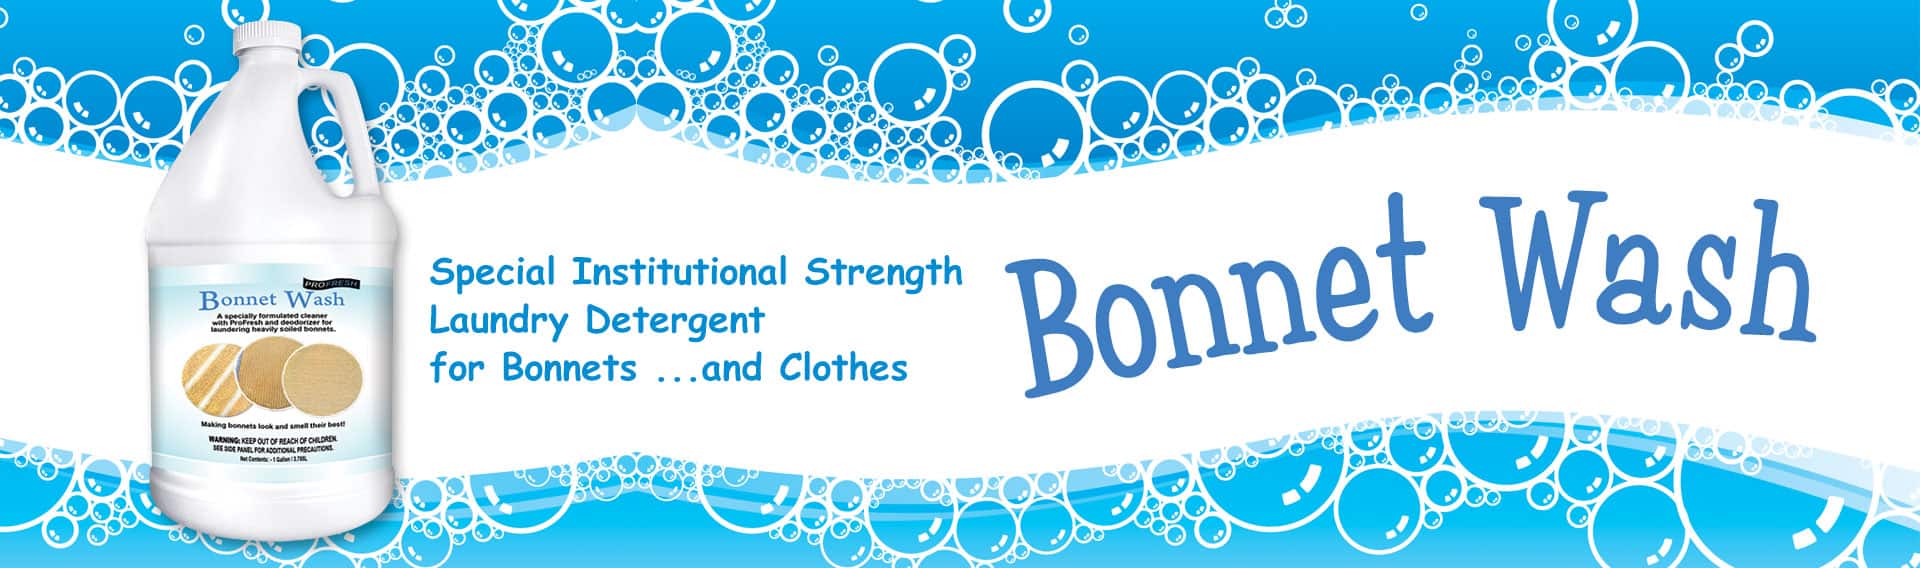 special bonnet cleaning product